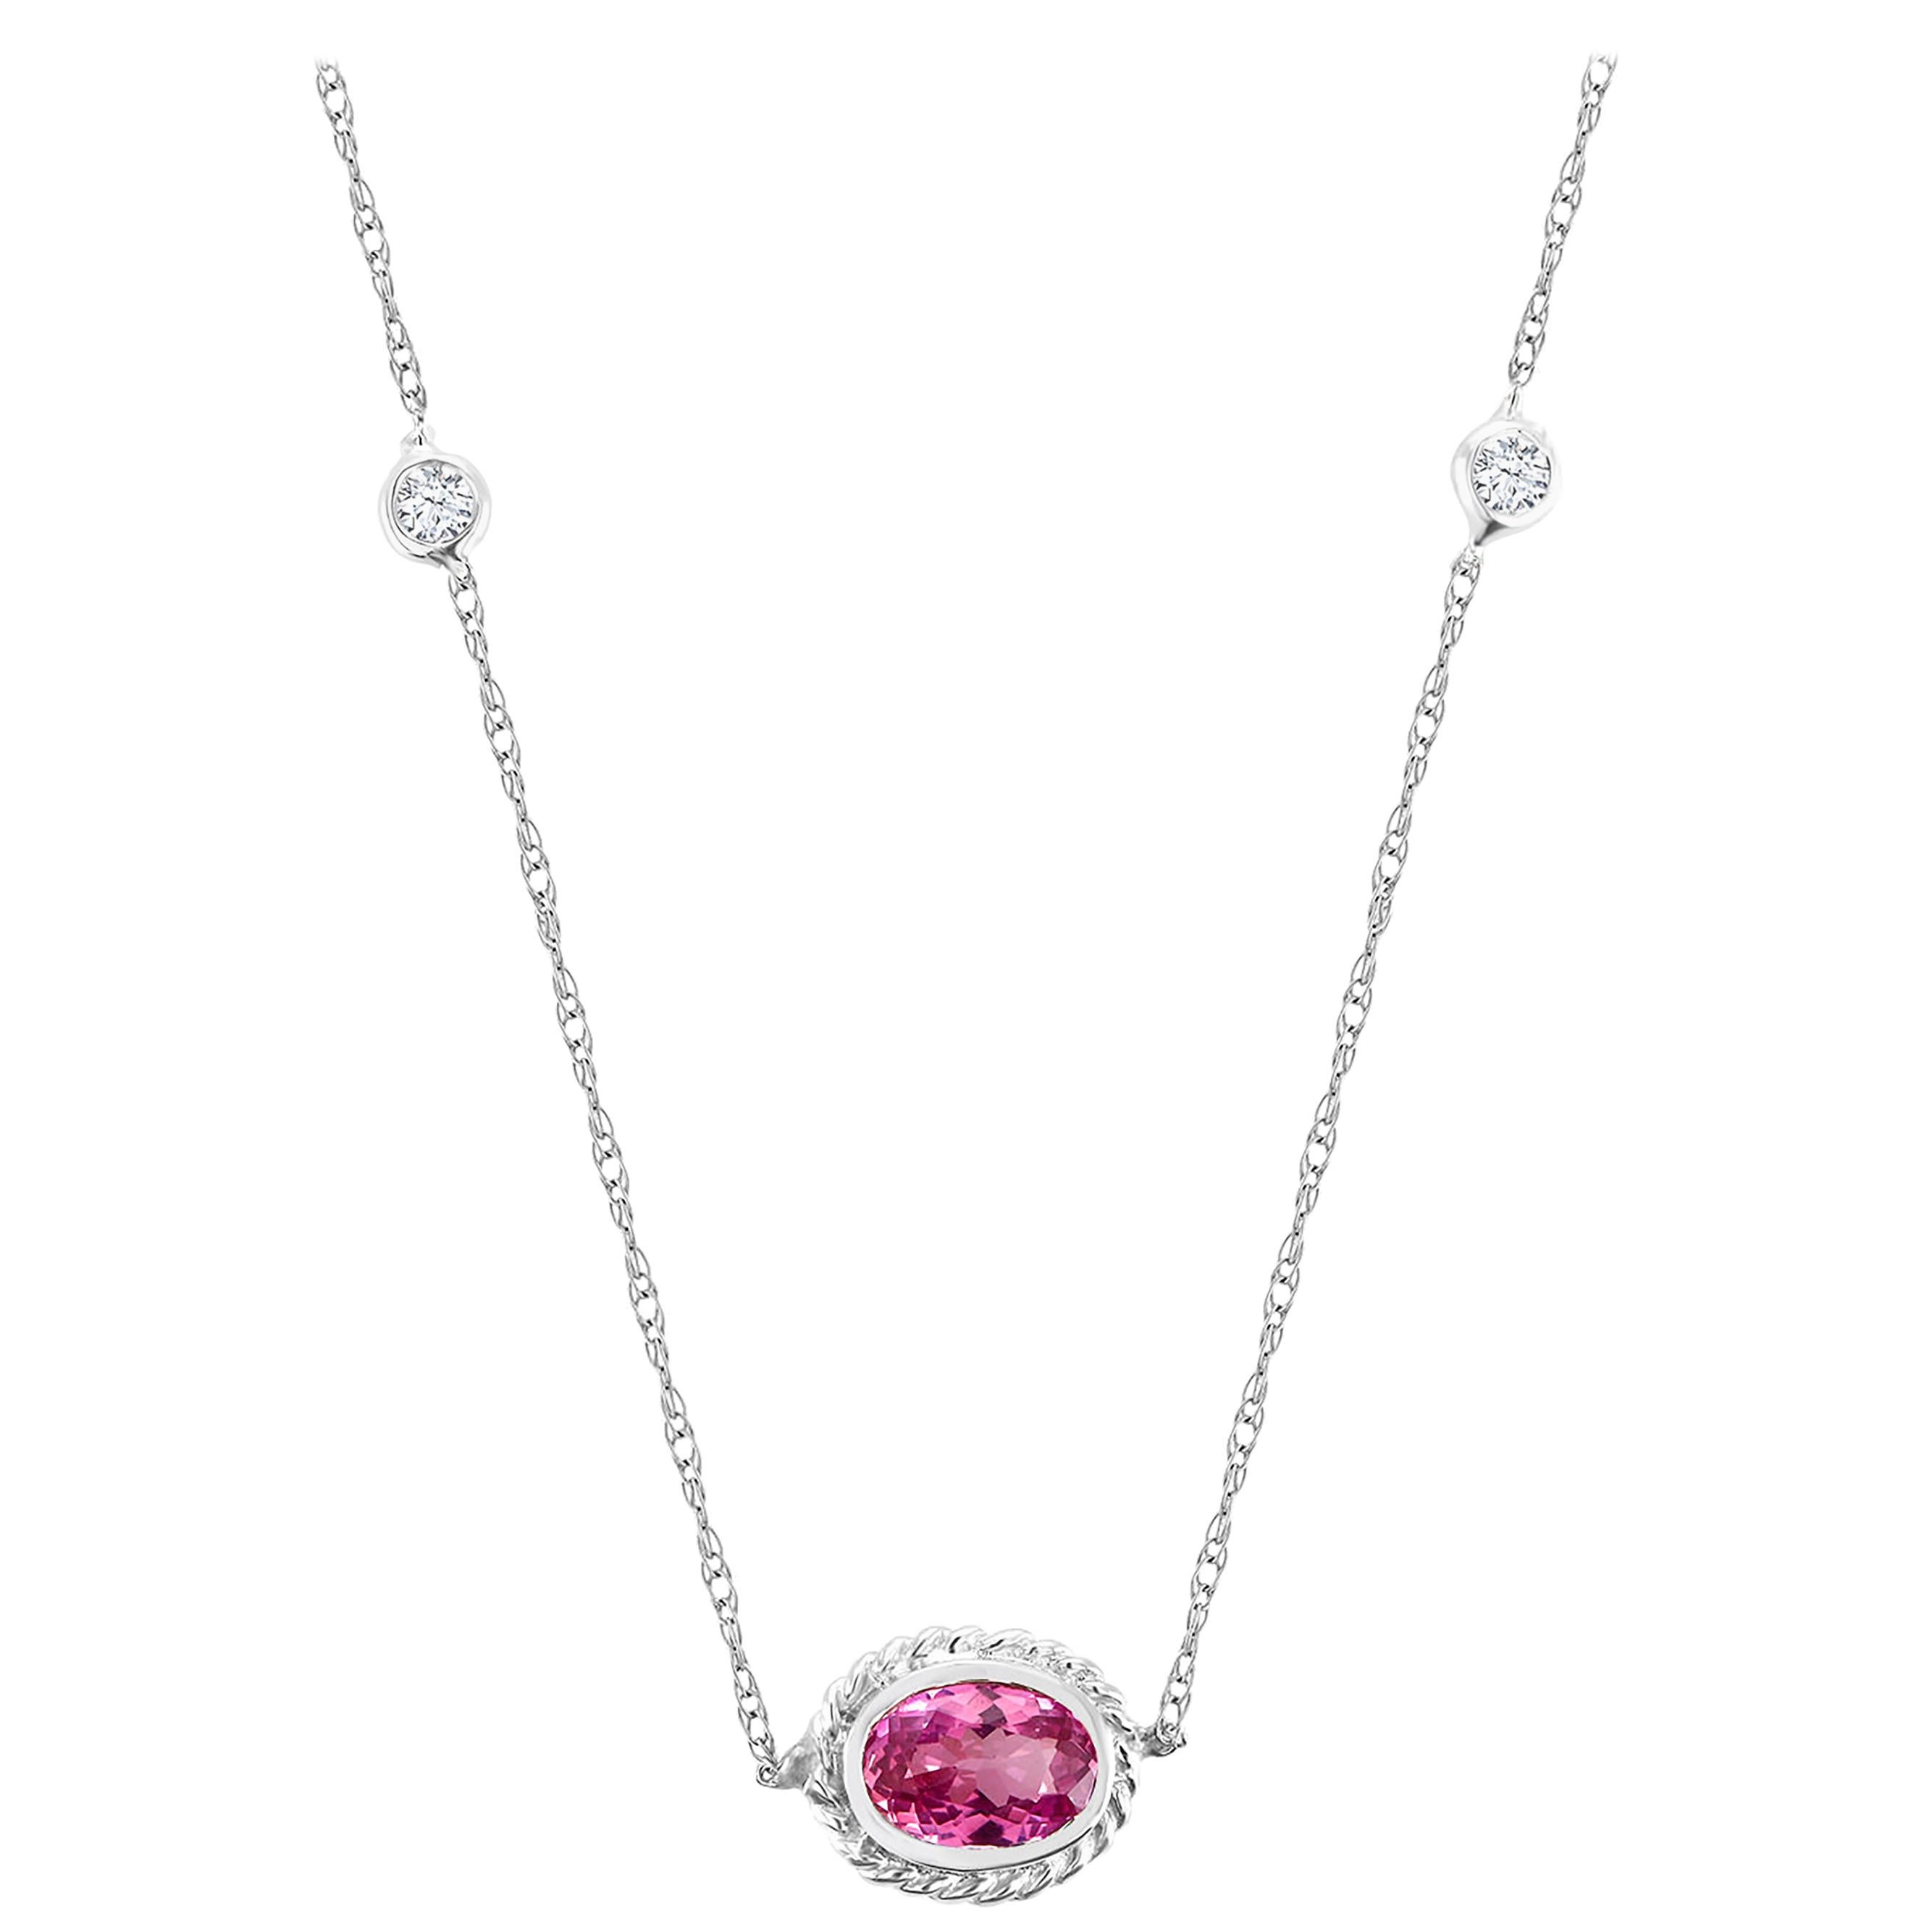 Modernist White Gold Pink Sapphire and Diamond Pendant Necklace Weighing 0.73 Carat